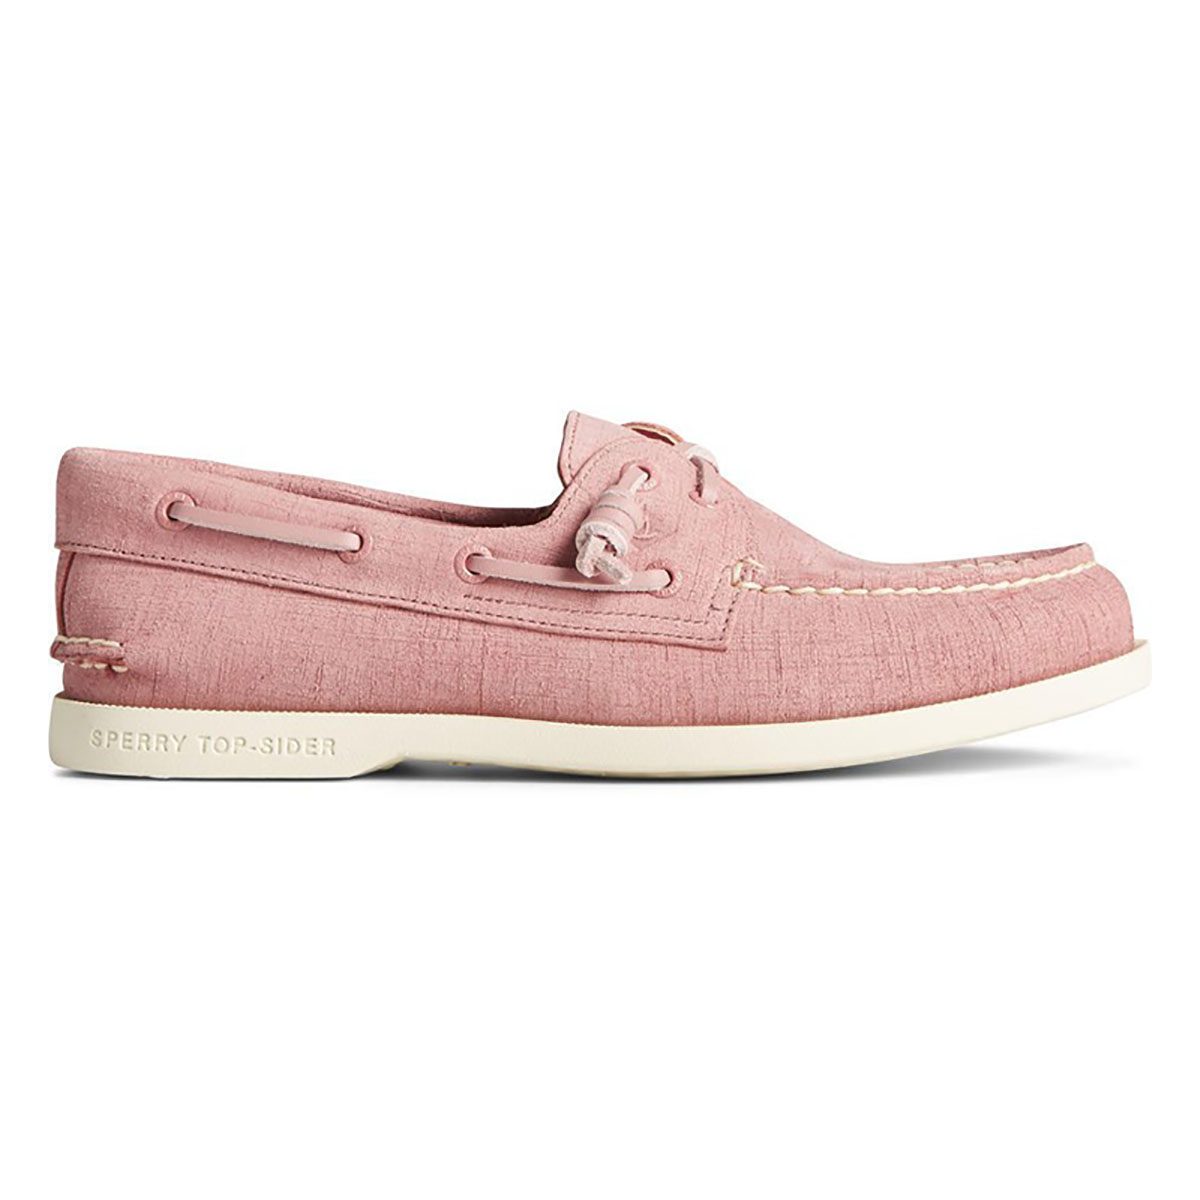 Sperry Women's Authentic Original Dusty Rose Tonal Leather Boat Shoes STS86657